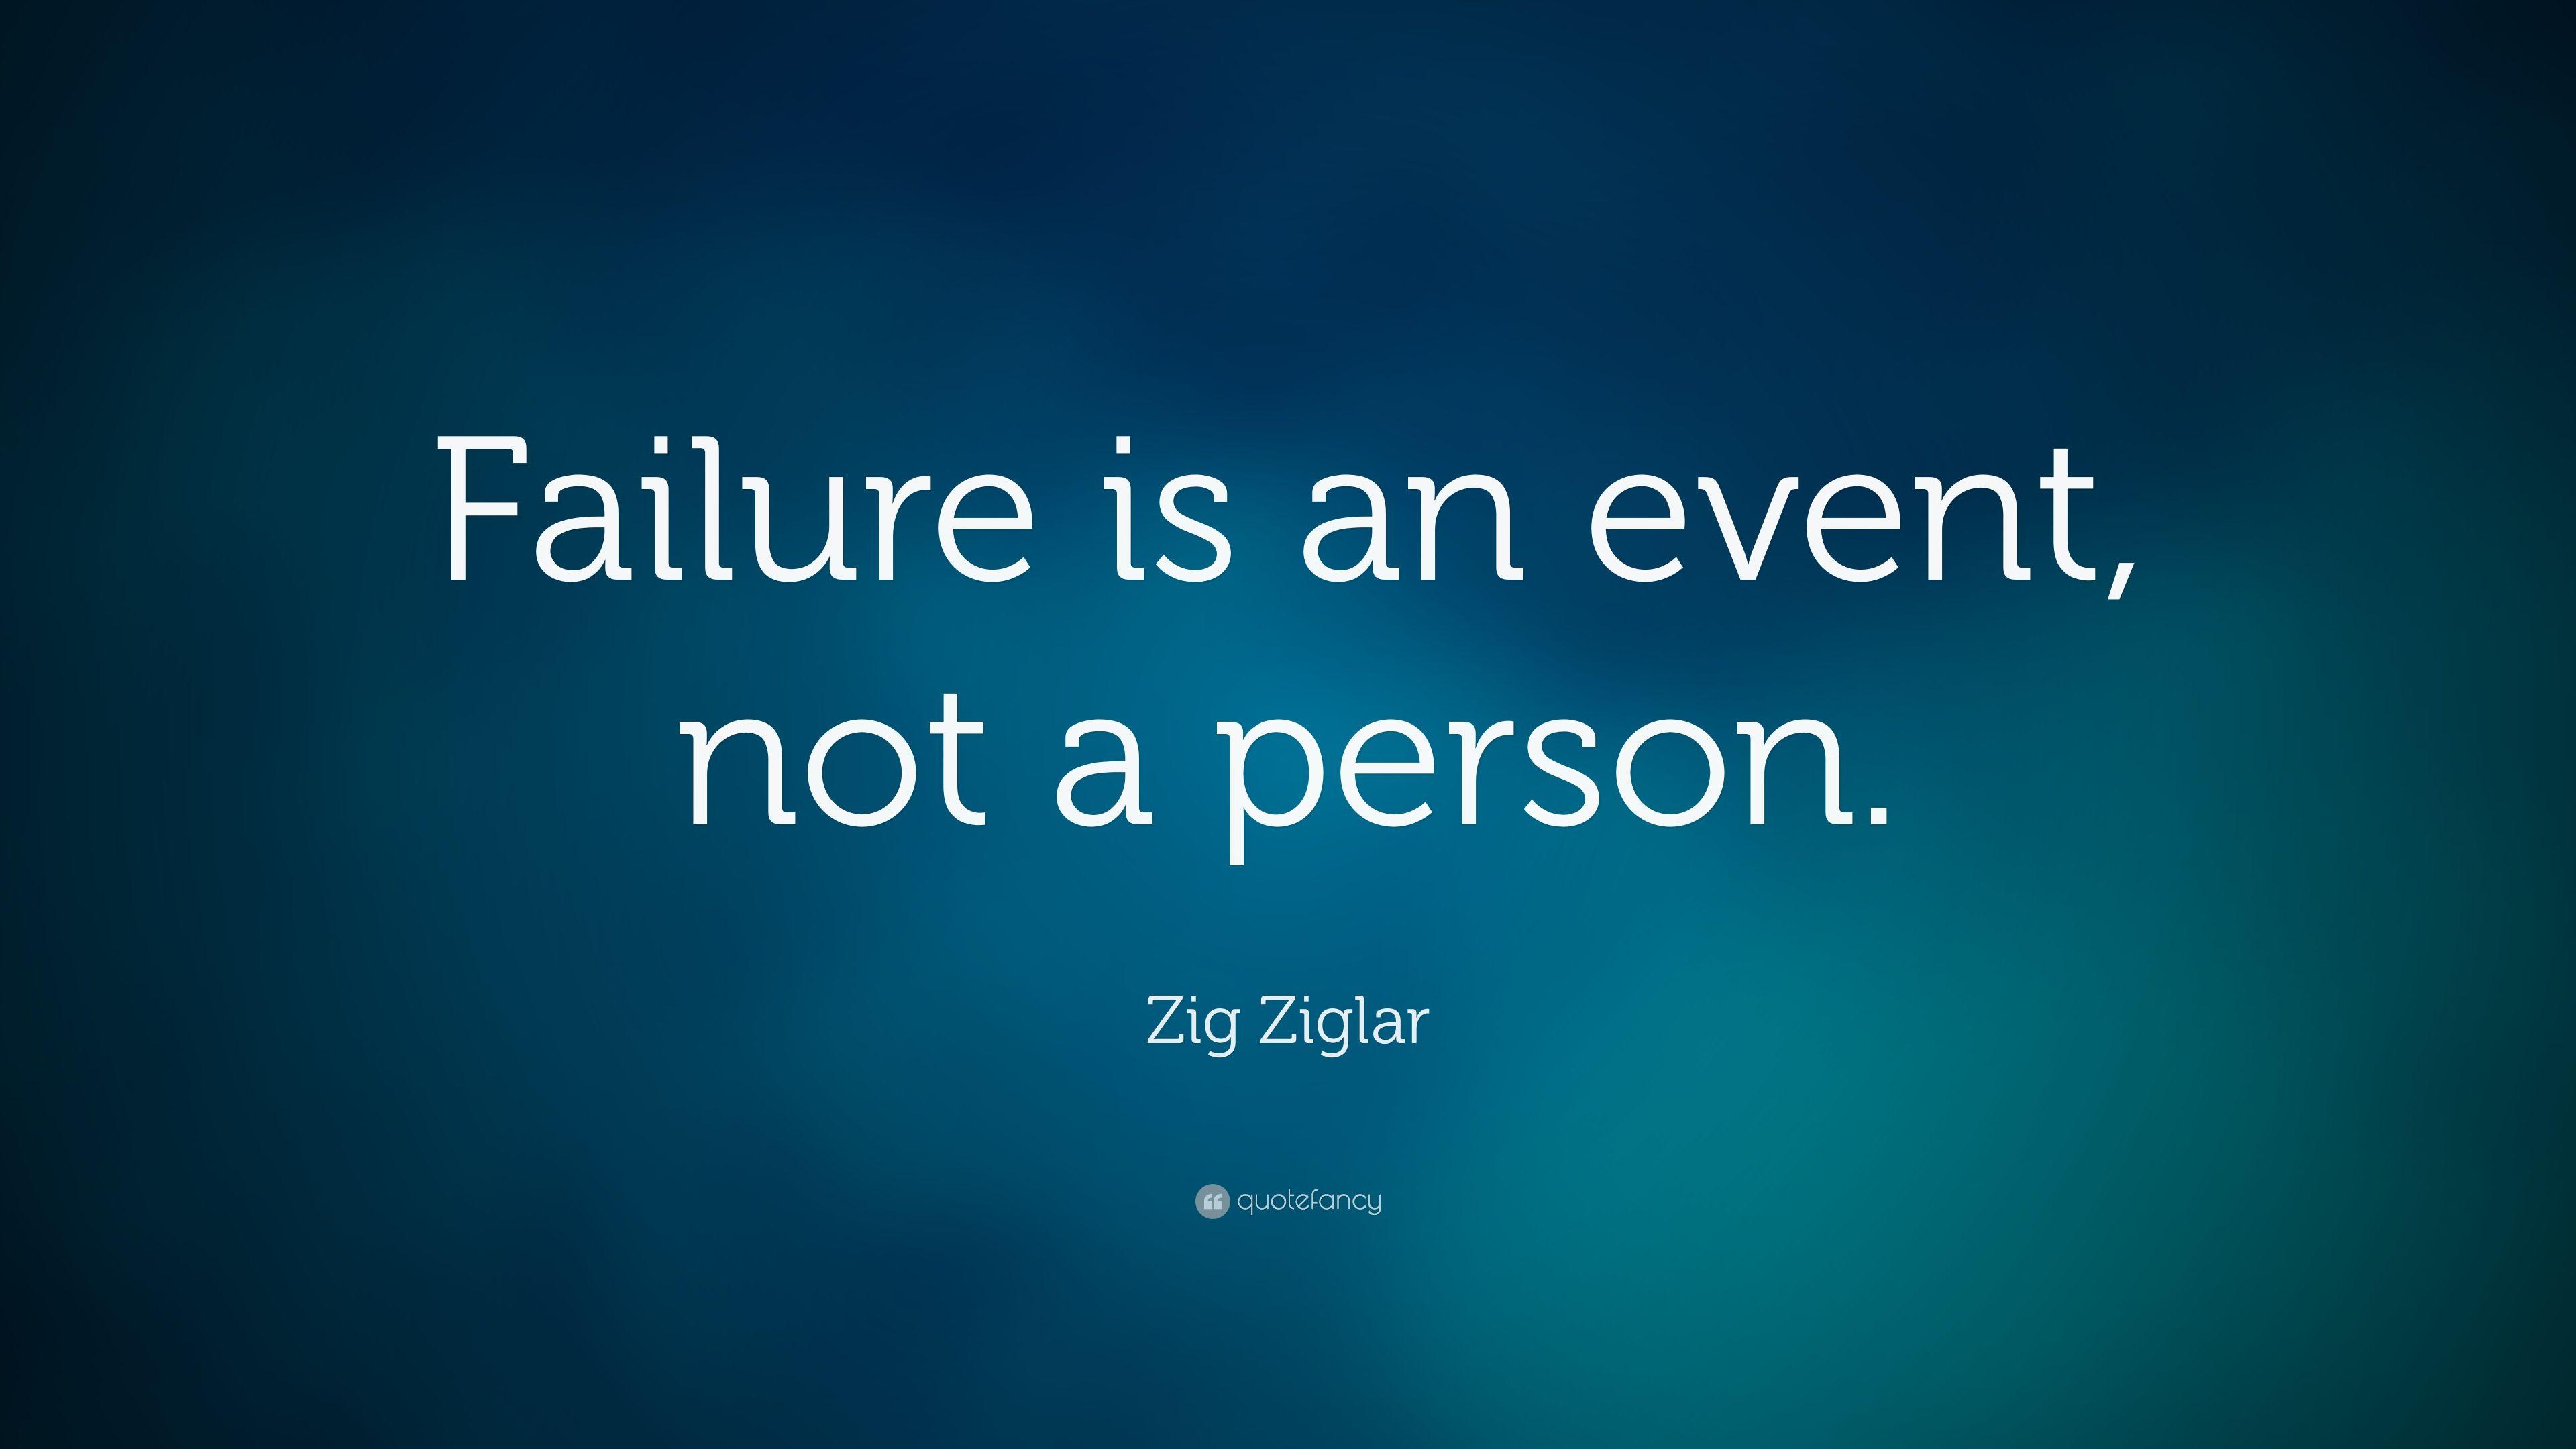 Zig Ziglar Quote: “Failure is an event, not a person.” 18